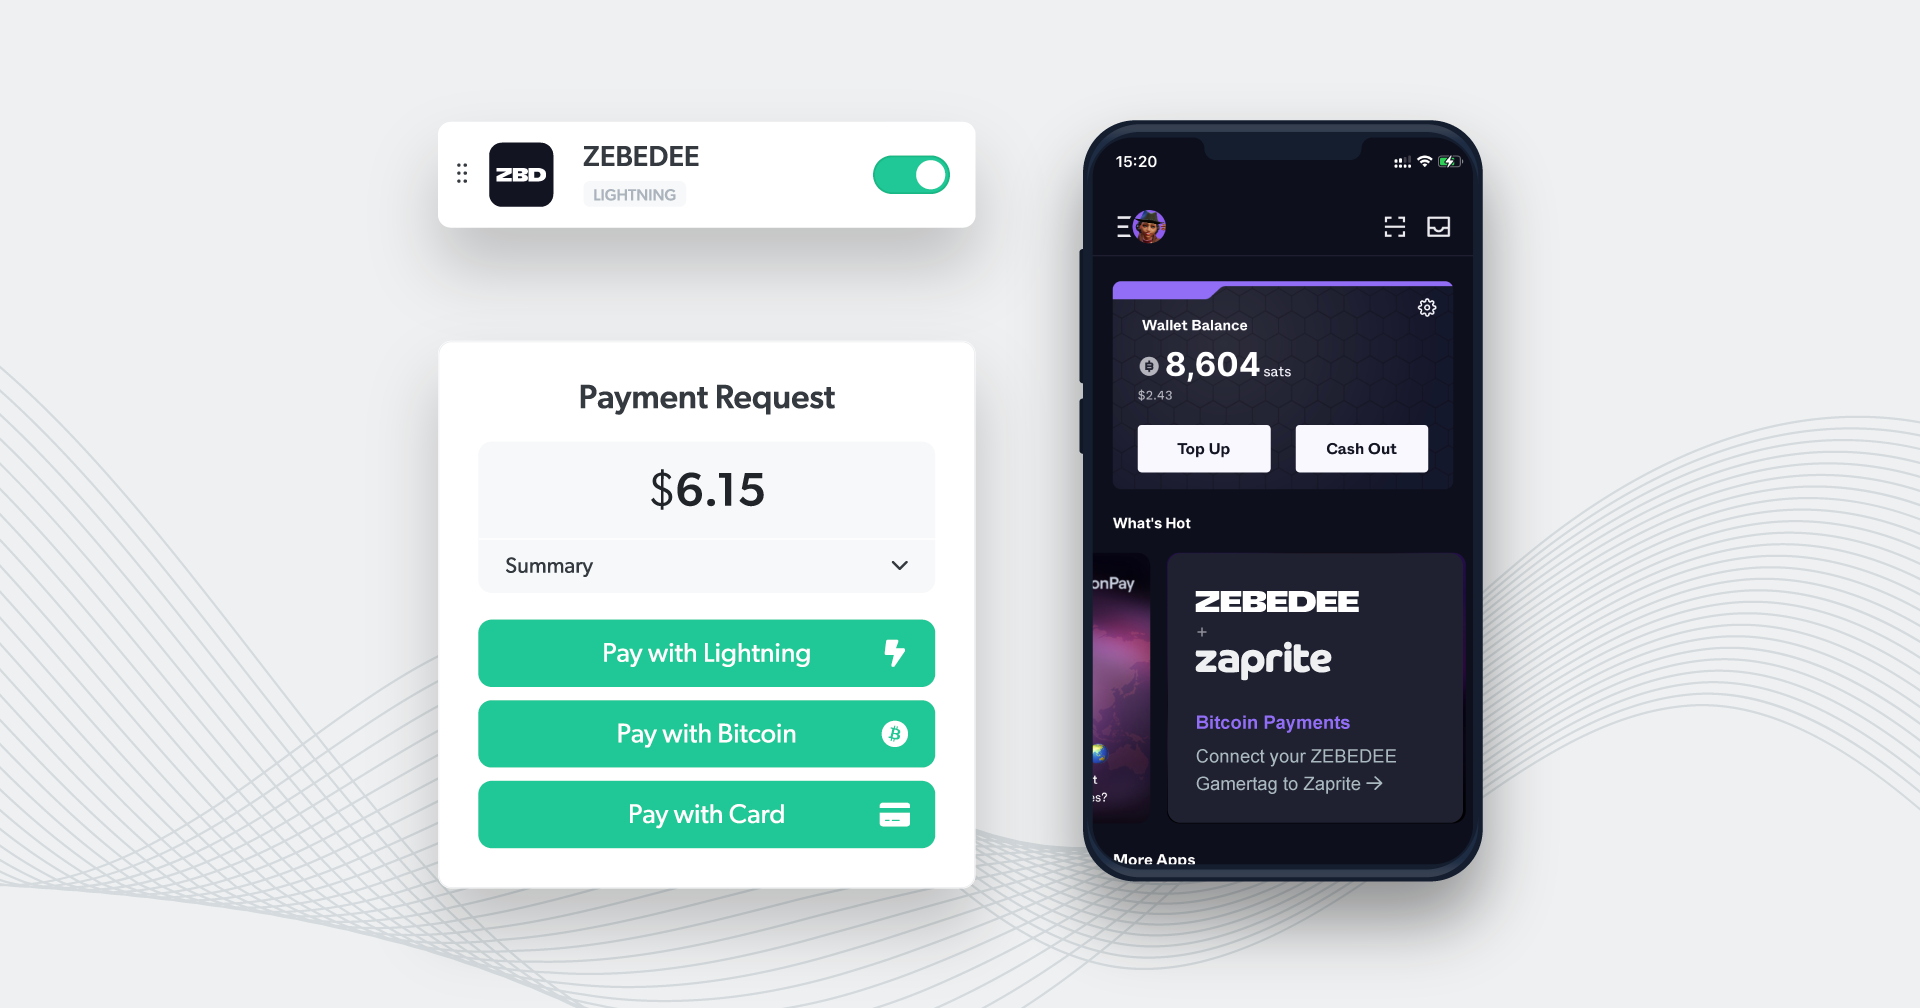 How To Connect Your ZEBEDEE Wallet